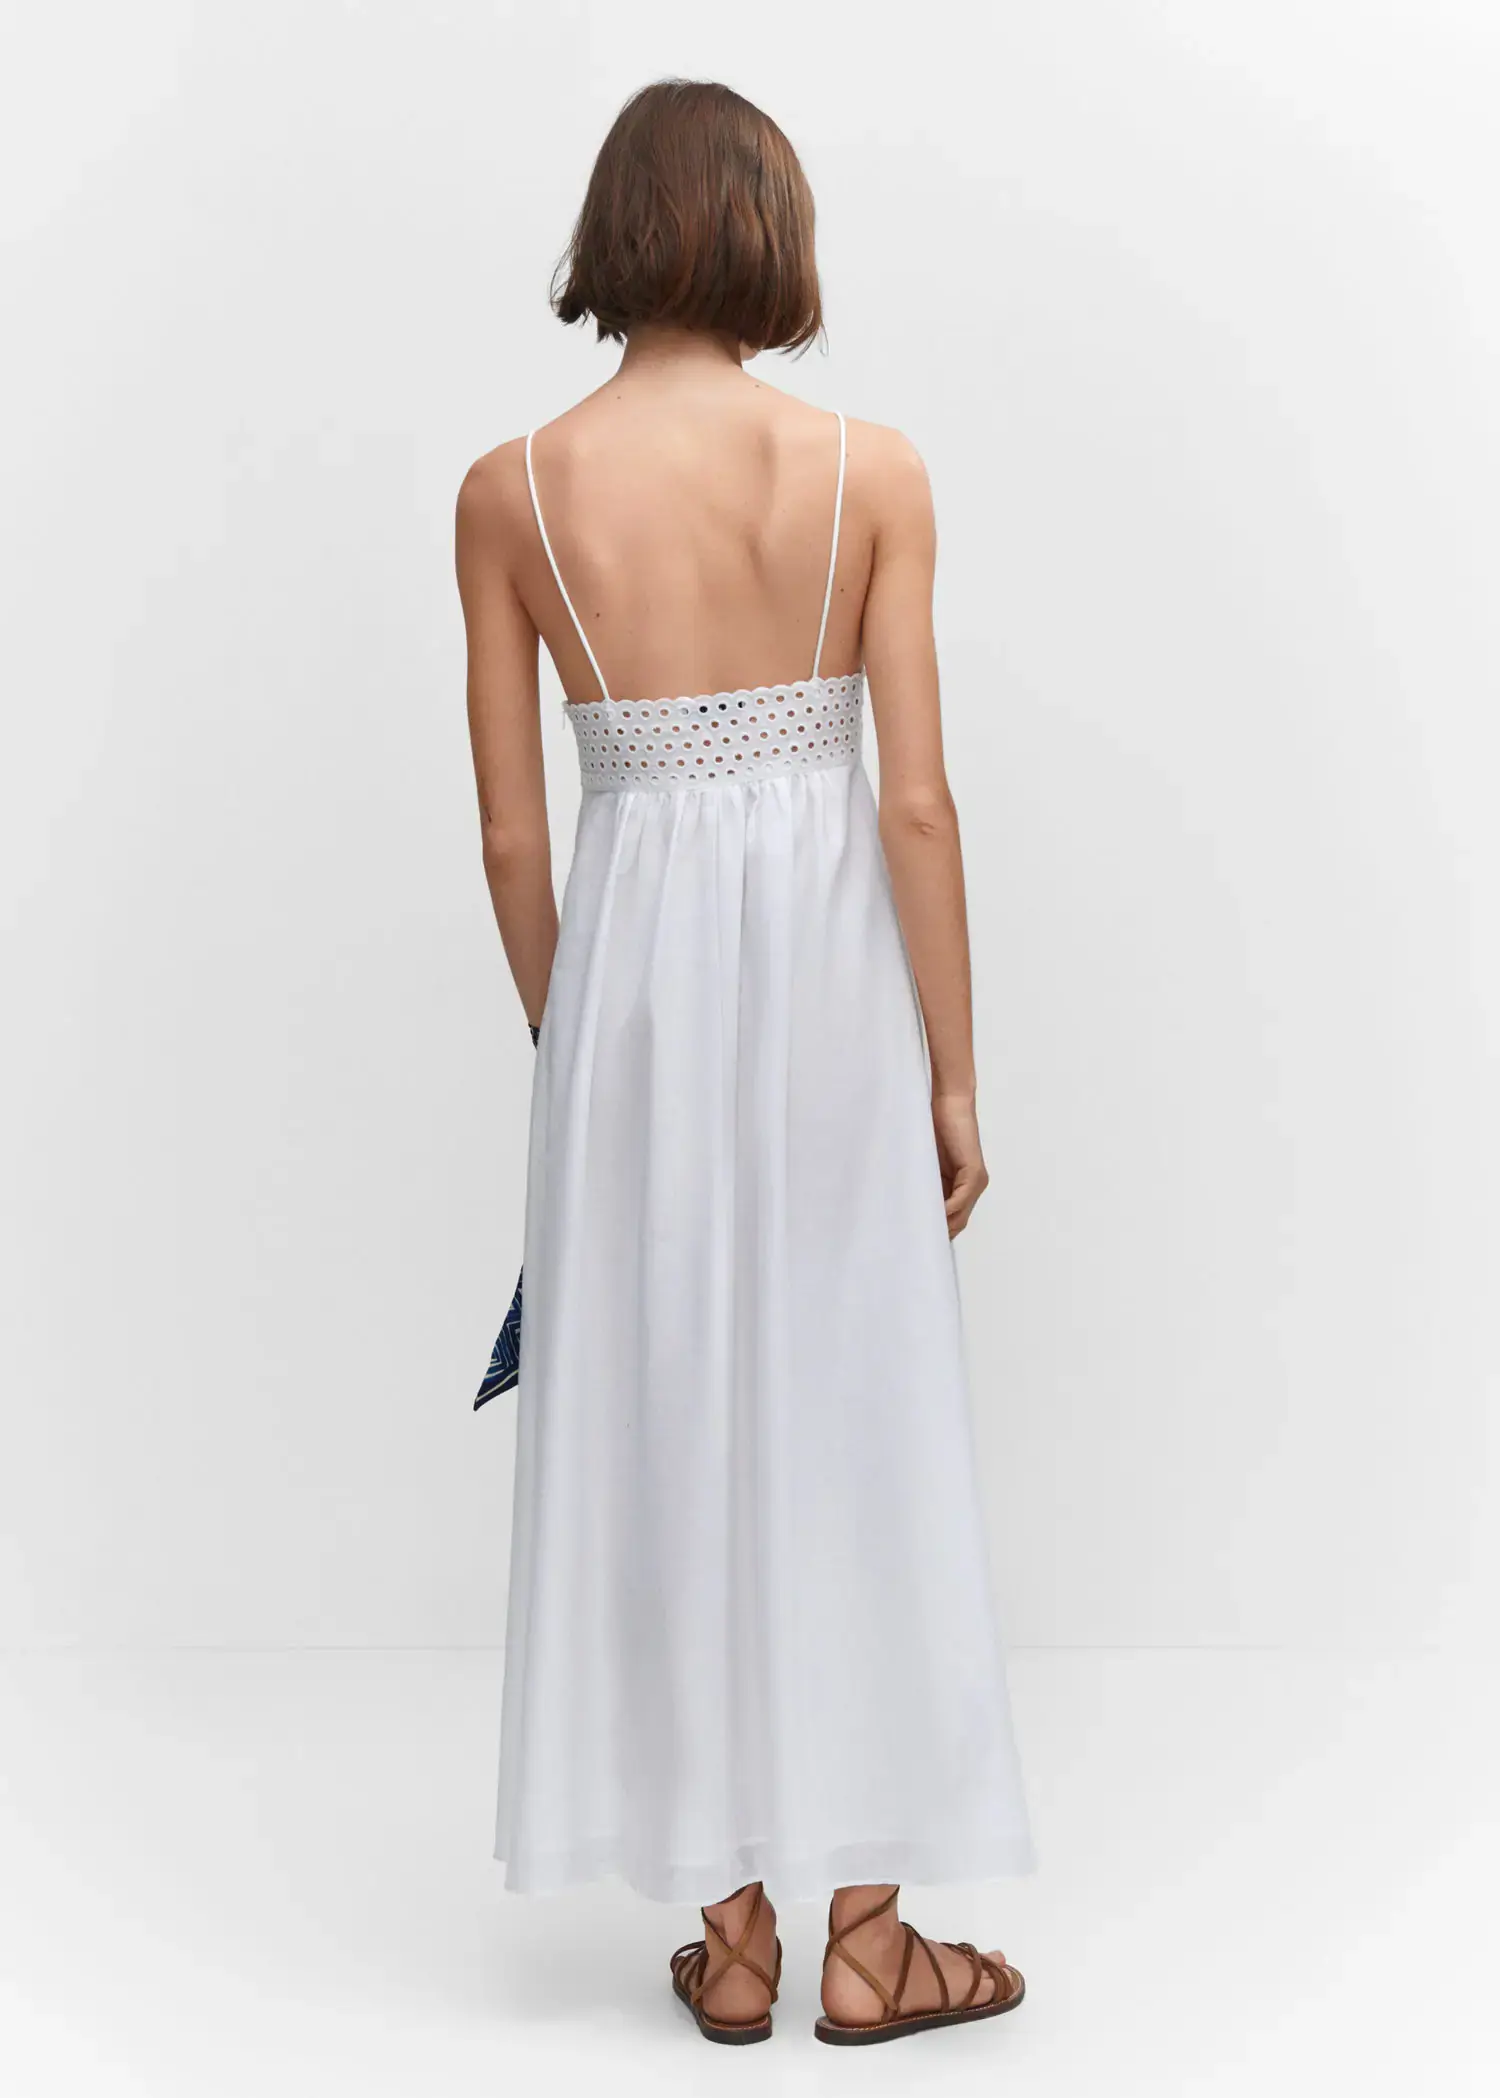 Mango Embroidered v-neckline dress. a woman in a white dress standing in front of a white wall. 